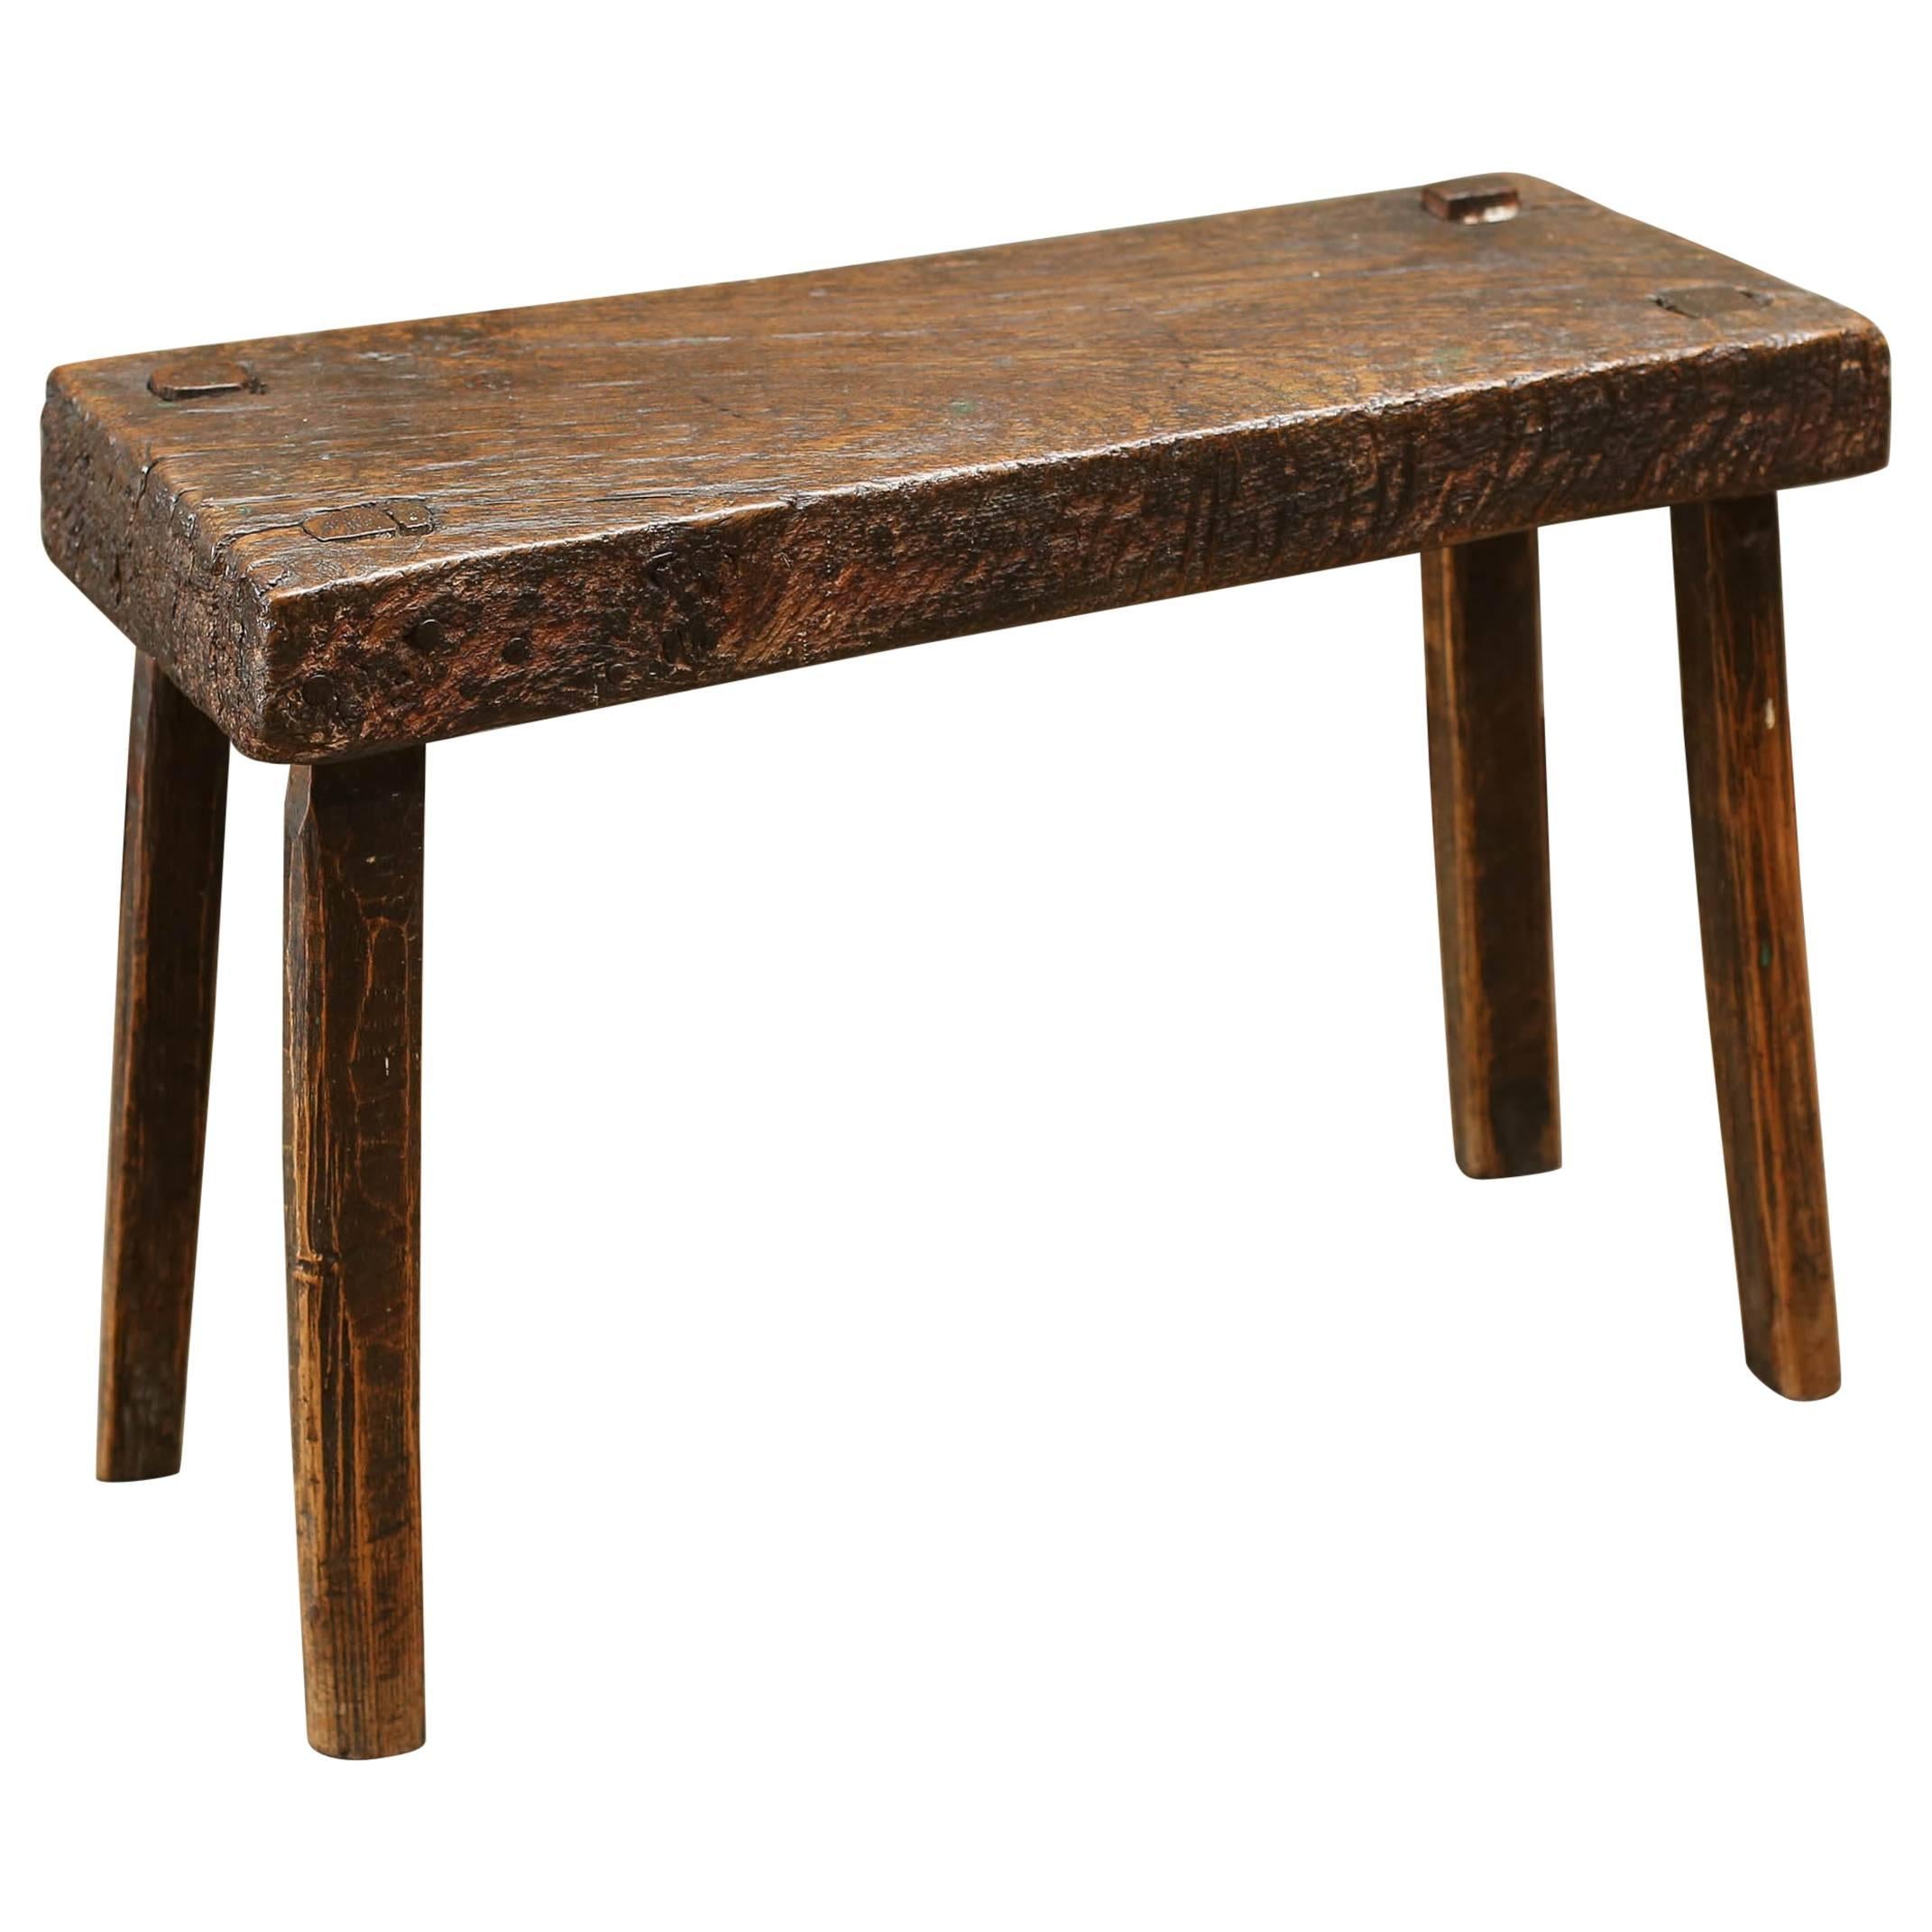 18th Century Rustic Stool from England